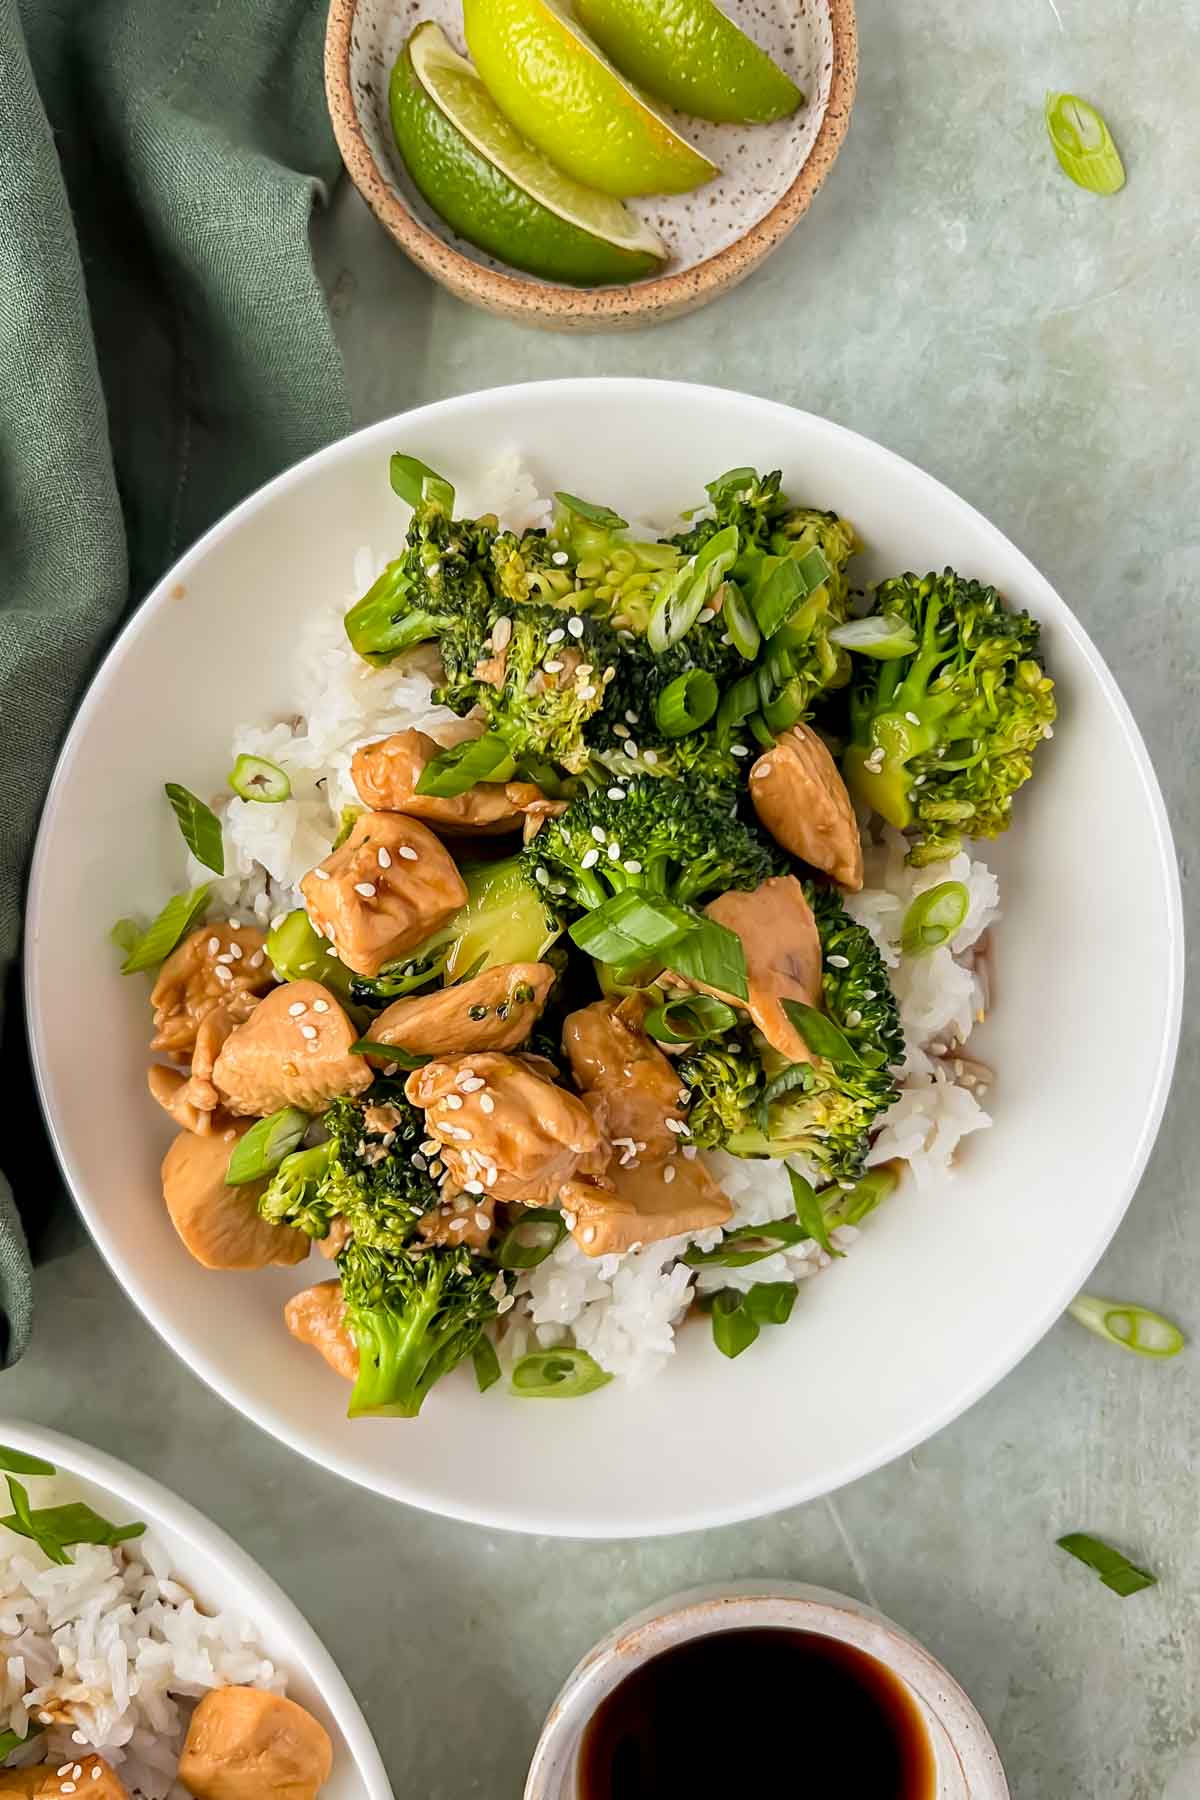 teriyaki chicken and broccoli served over white rice in white bowl.